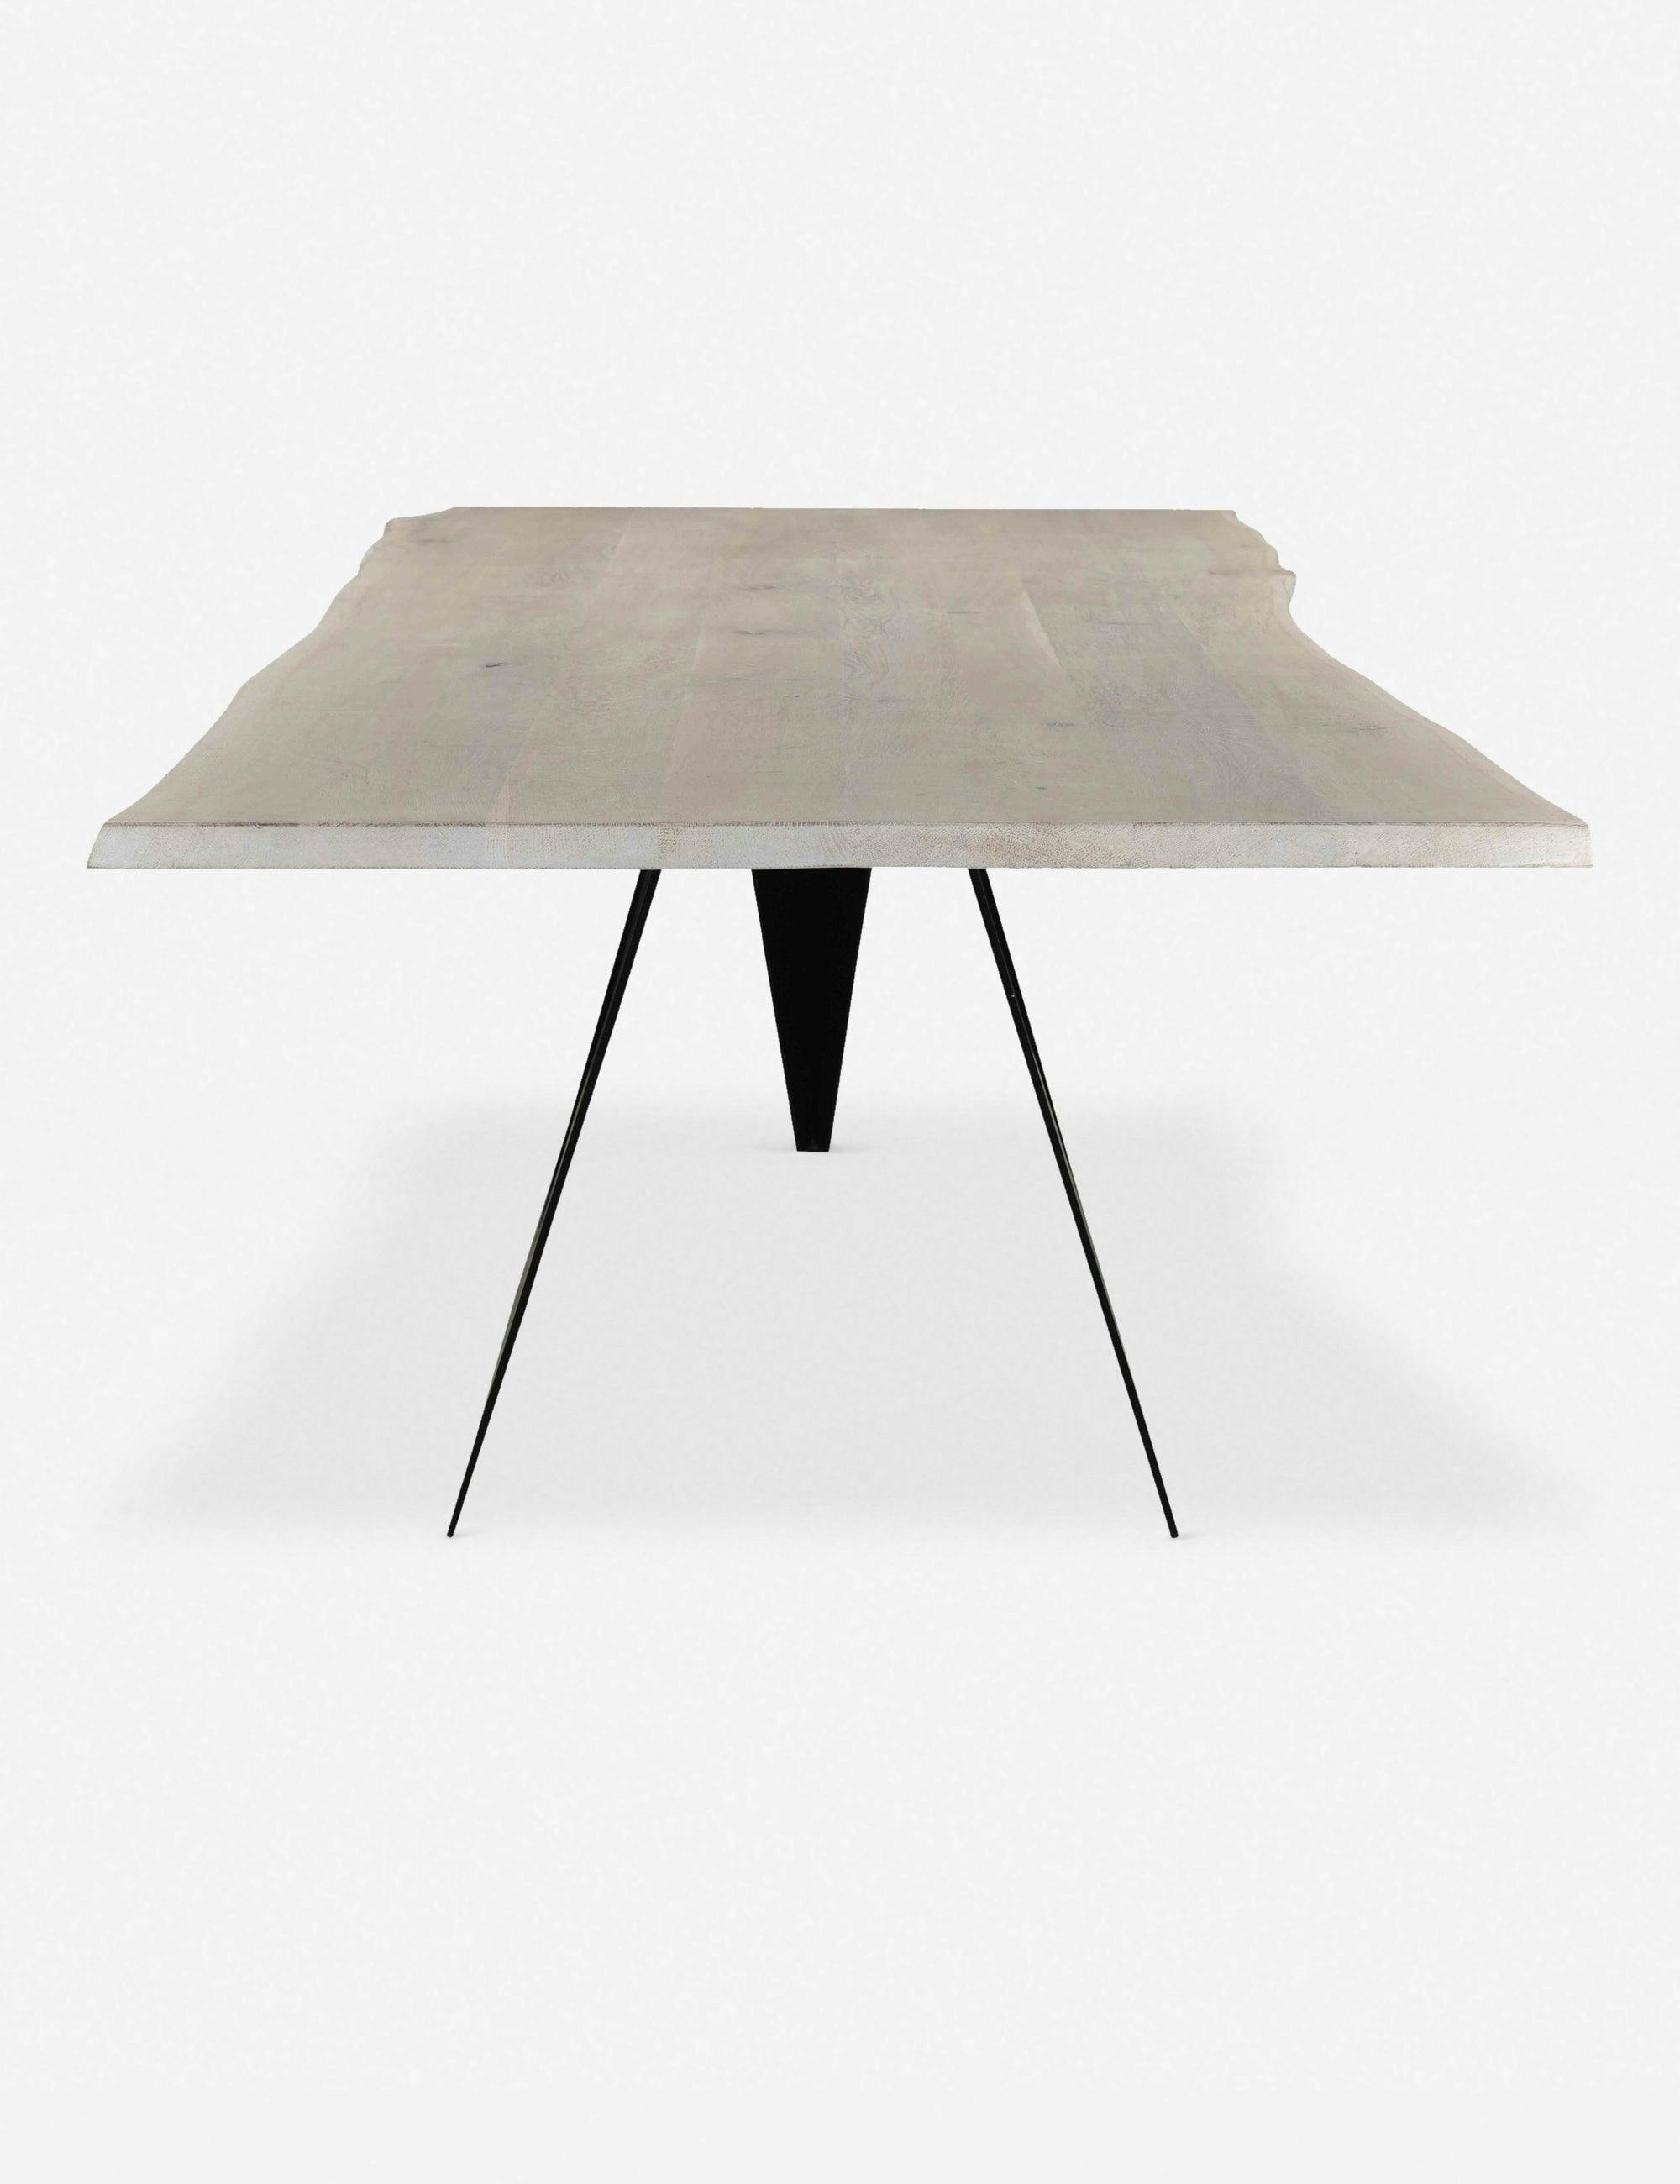 Contemporary Black and Gray Solid Oak Dining Table with Iron Base